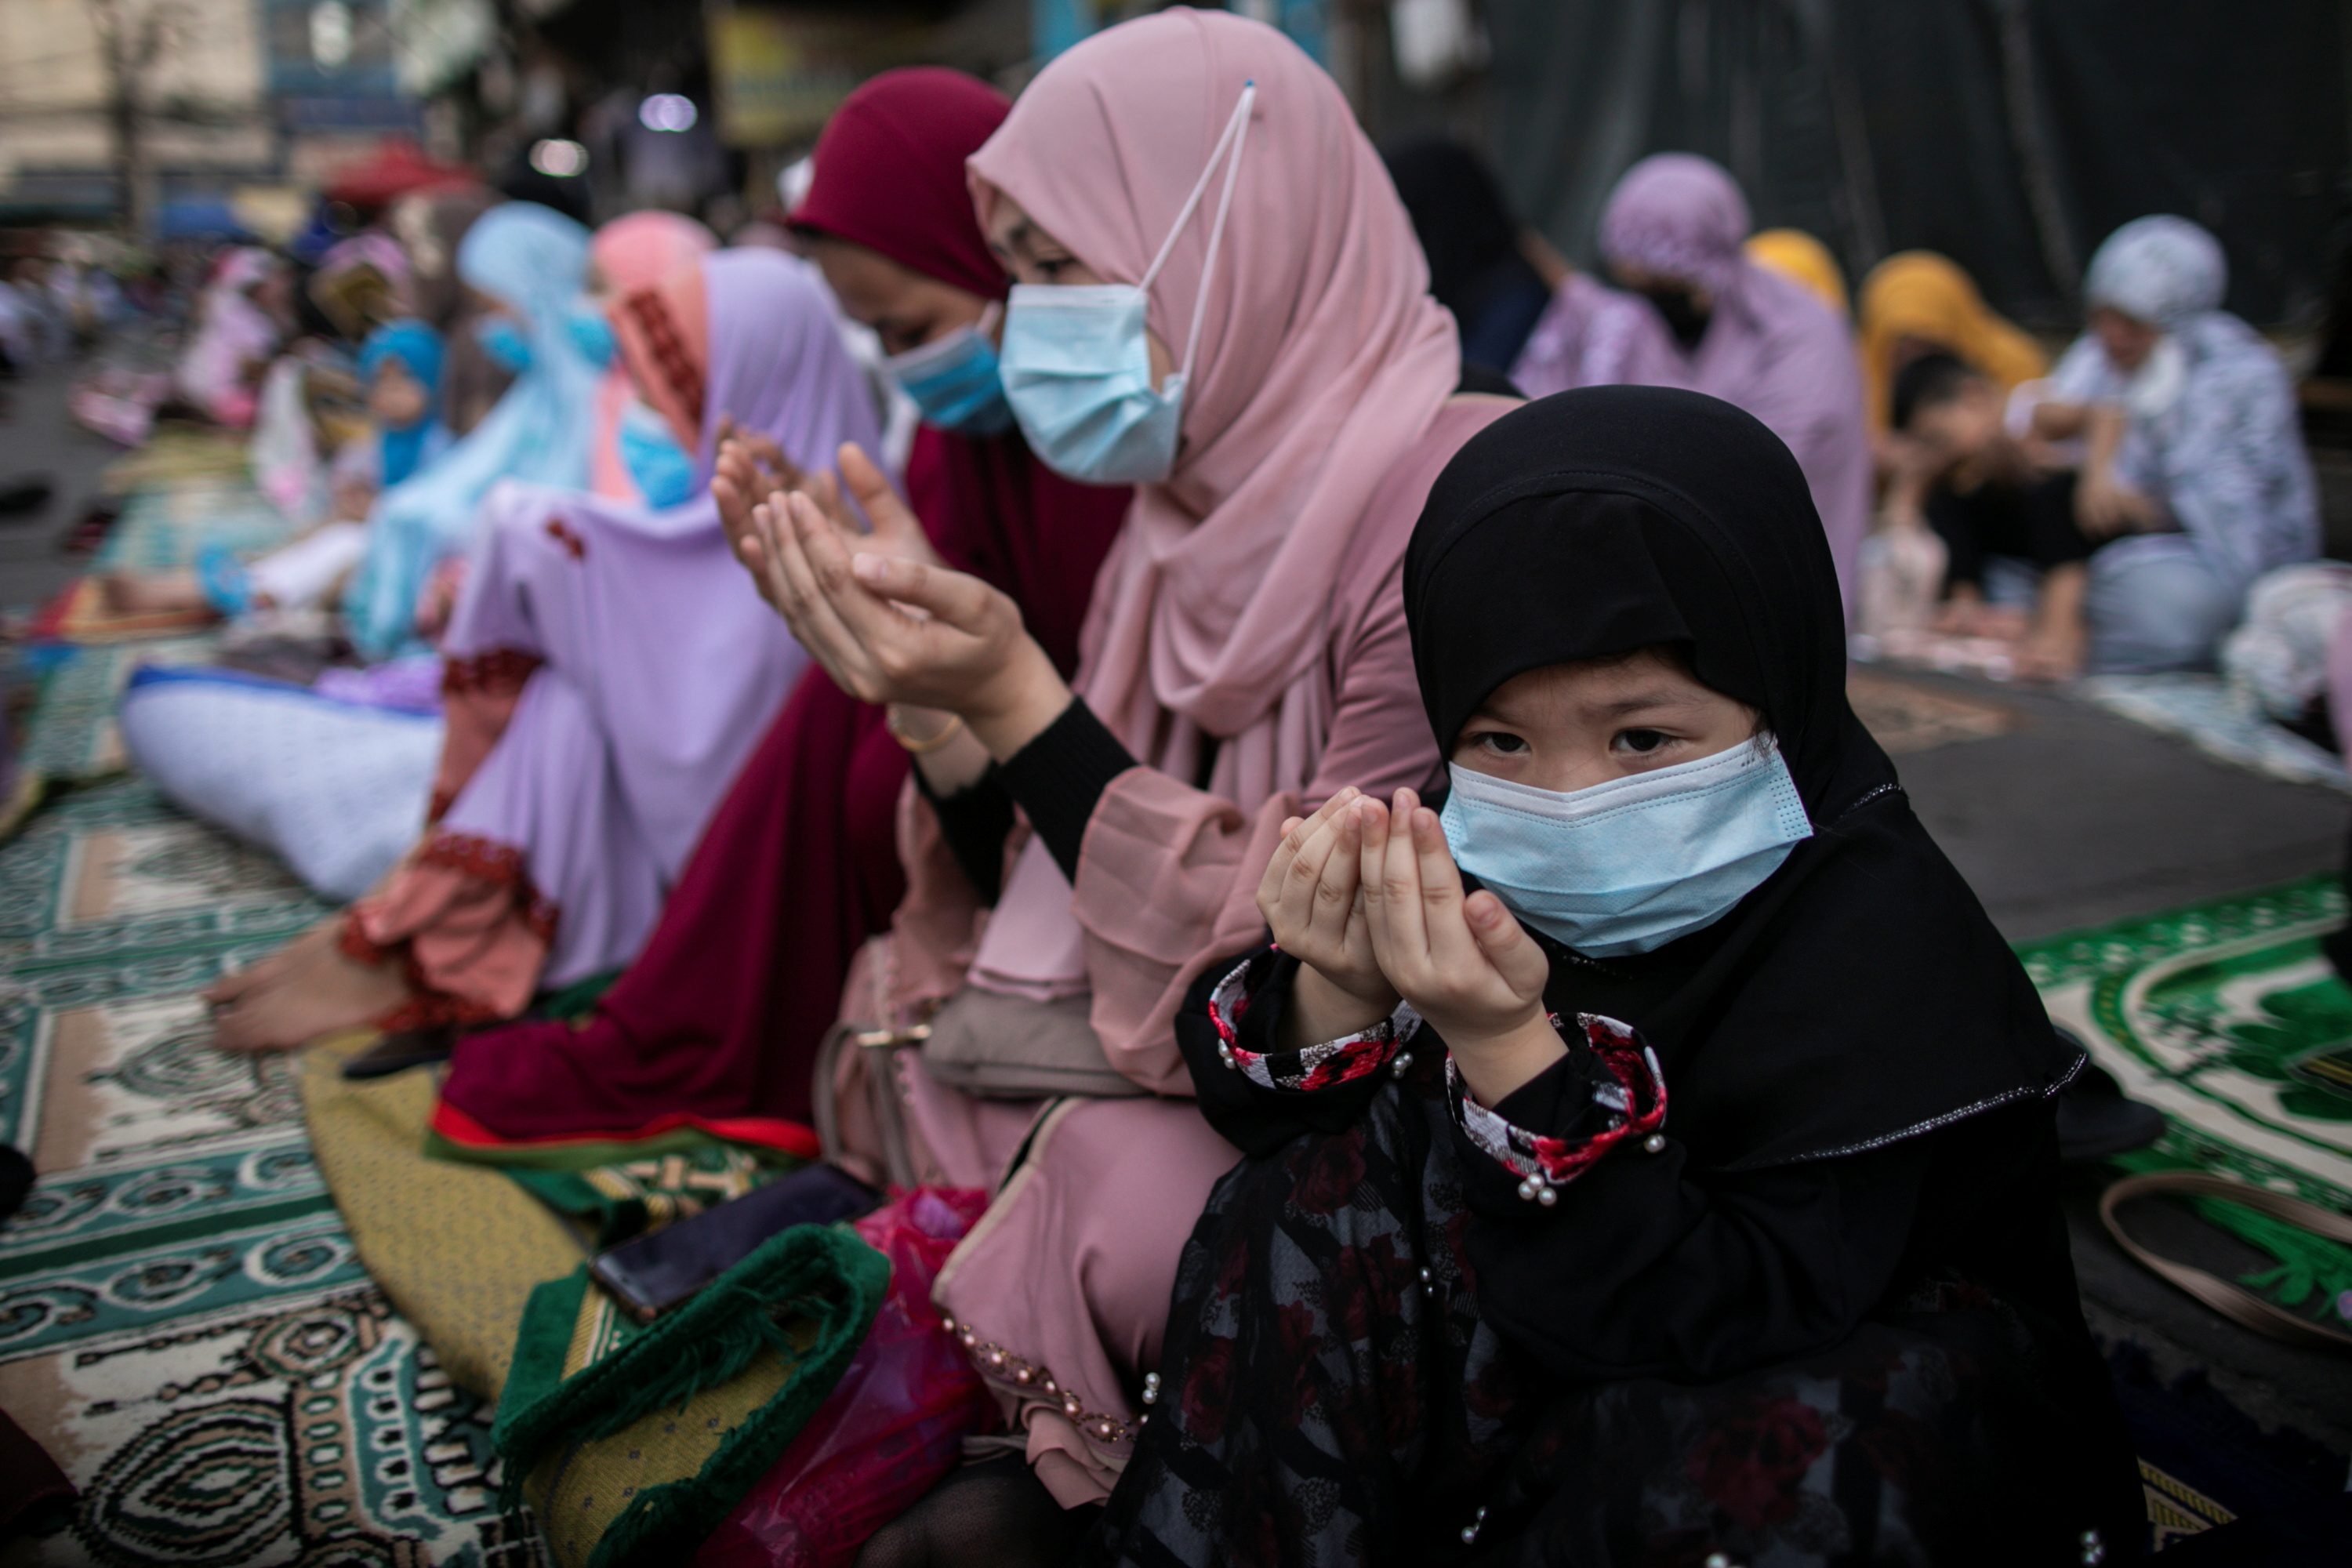 IN PHOTOS: For 2nd year, thousands celebrate Eid’l Fitr during pandemic